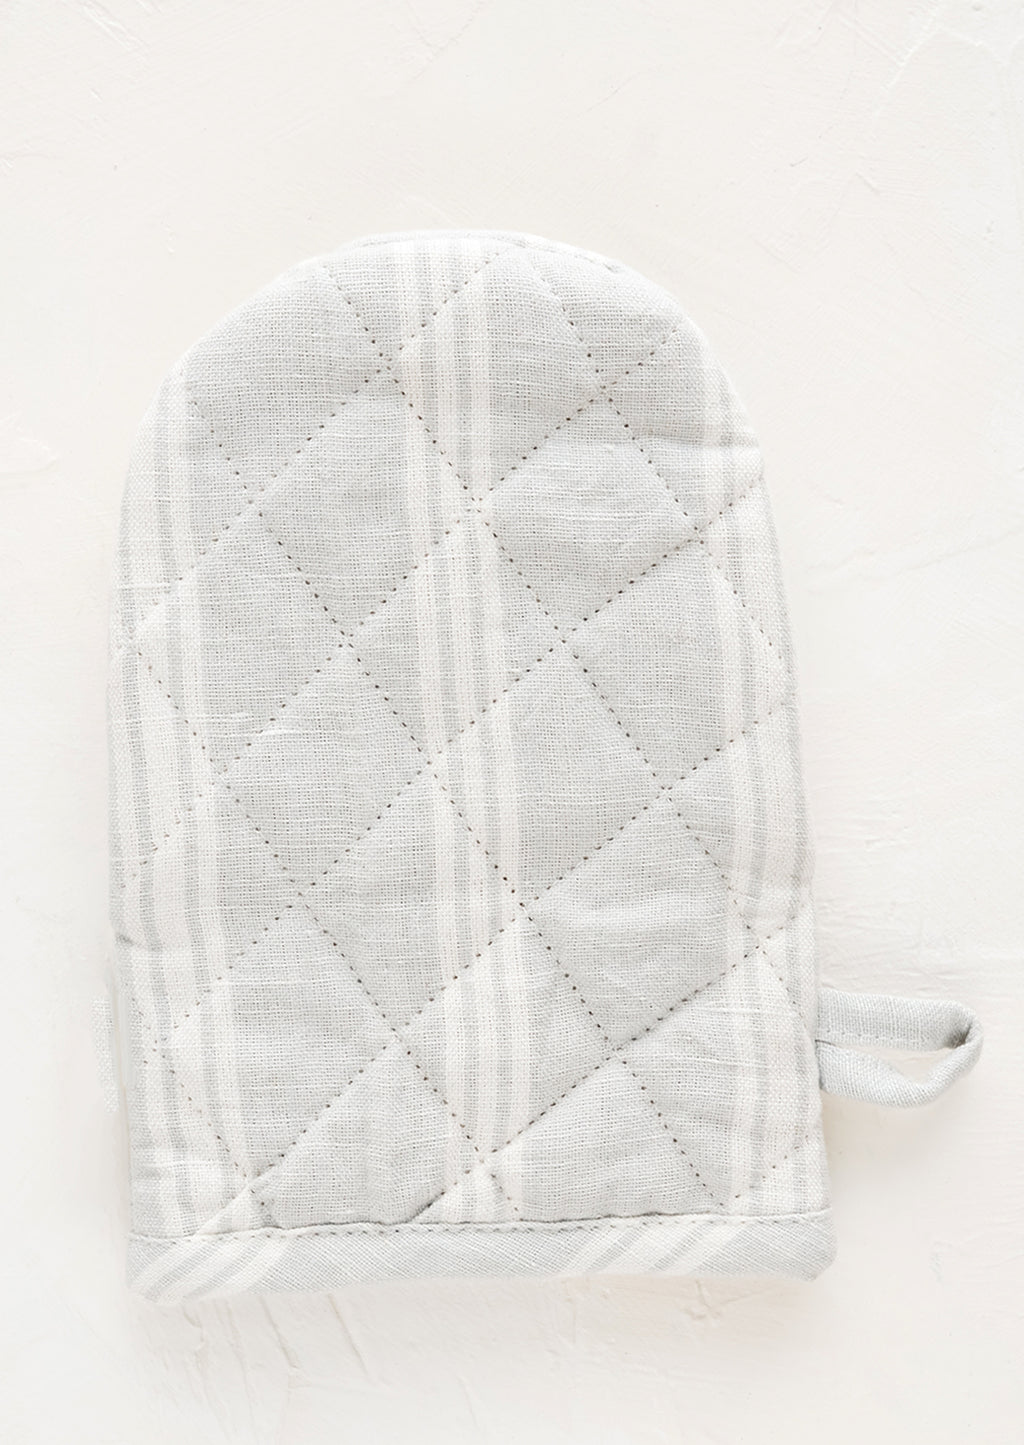 Cloud / White: A quilted oven mitt made from light grey and white striped linen.